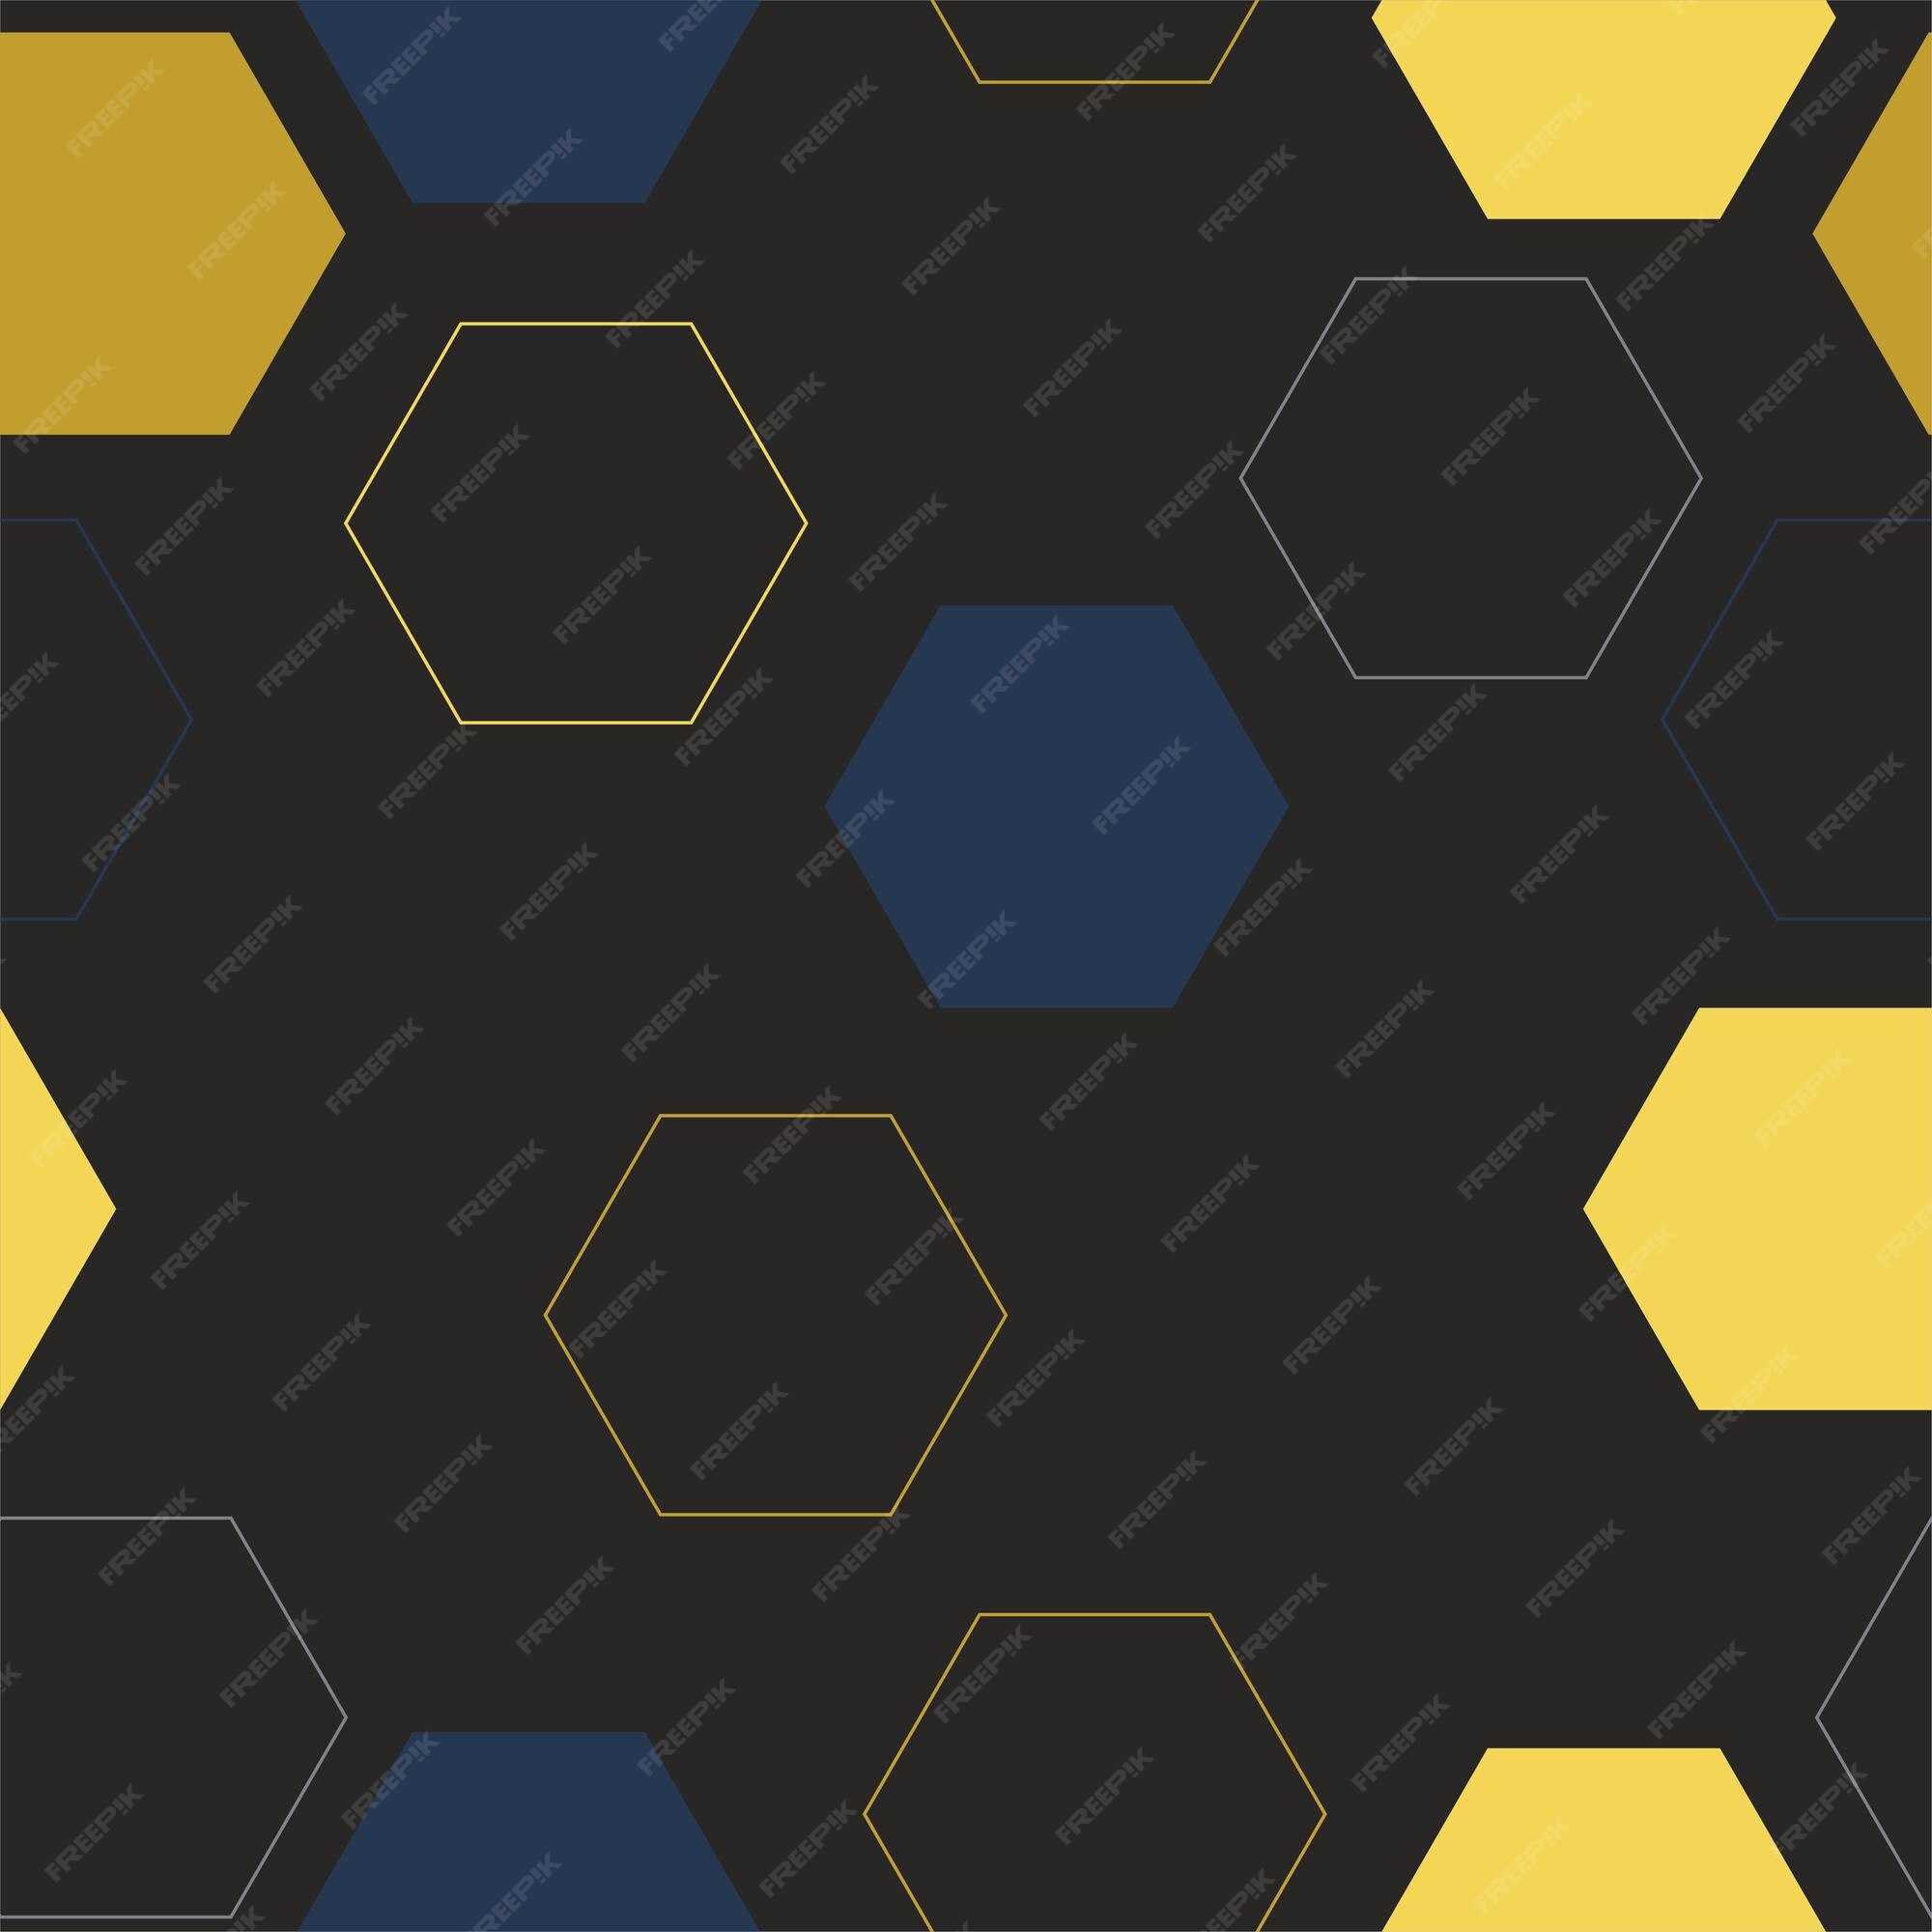 Premium Vector | Hexagonal camouflage seamless pattern abstract digital  geometric military endless camo background .